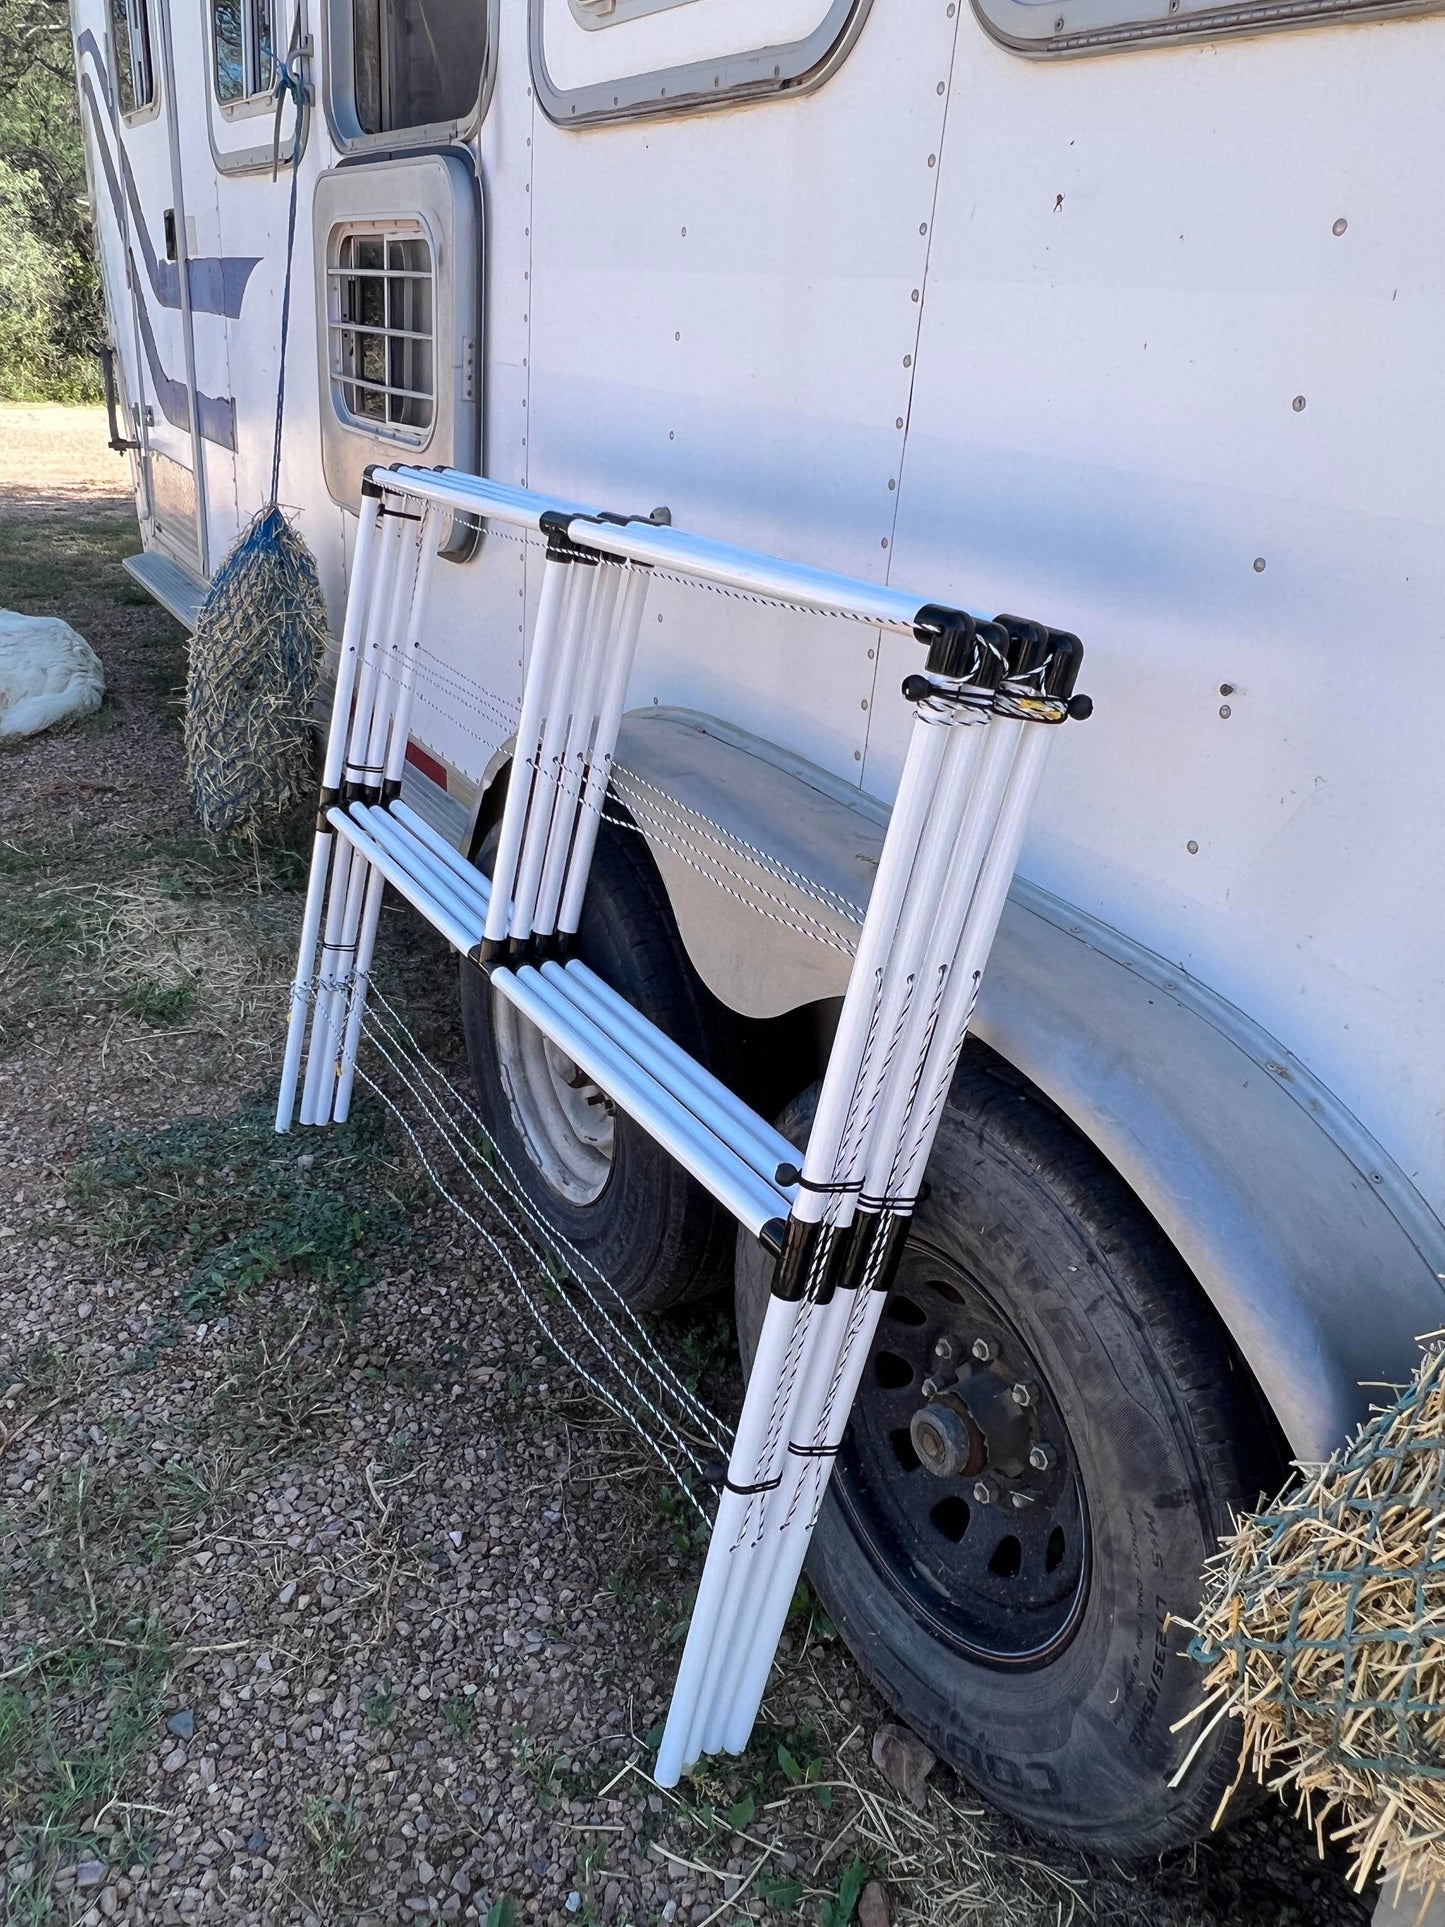 Ready Made Portable Electric Horse Corral Fencing: (Electric EconoLine 2 Panels; 2 Rails)